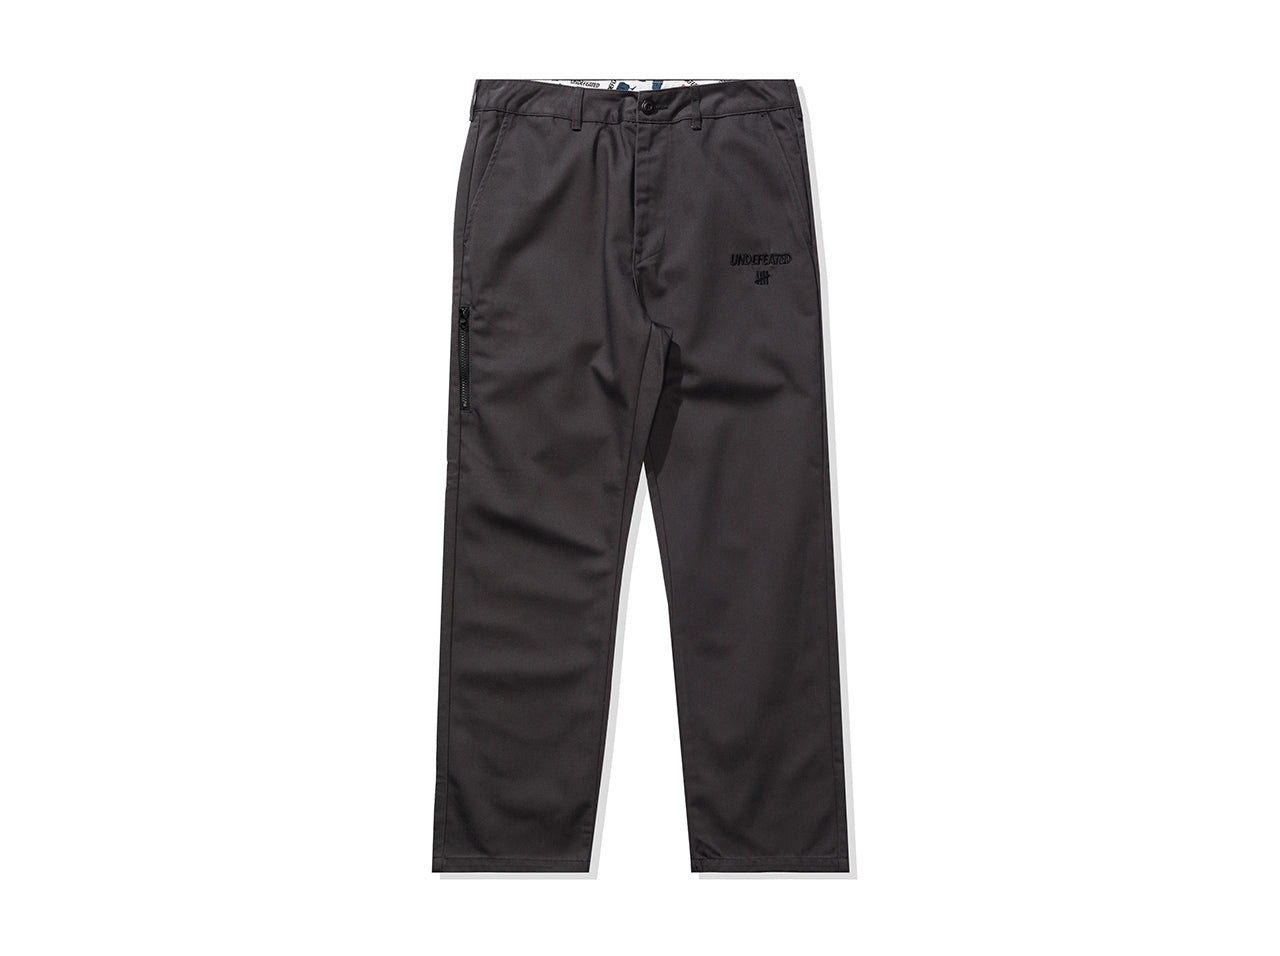 JAPAN LIMITED ITEM】UNDEFEATED WORK PANT - ワークパンツ/カーゴパンツ